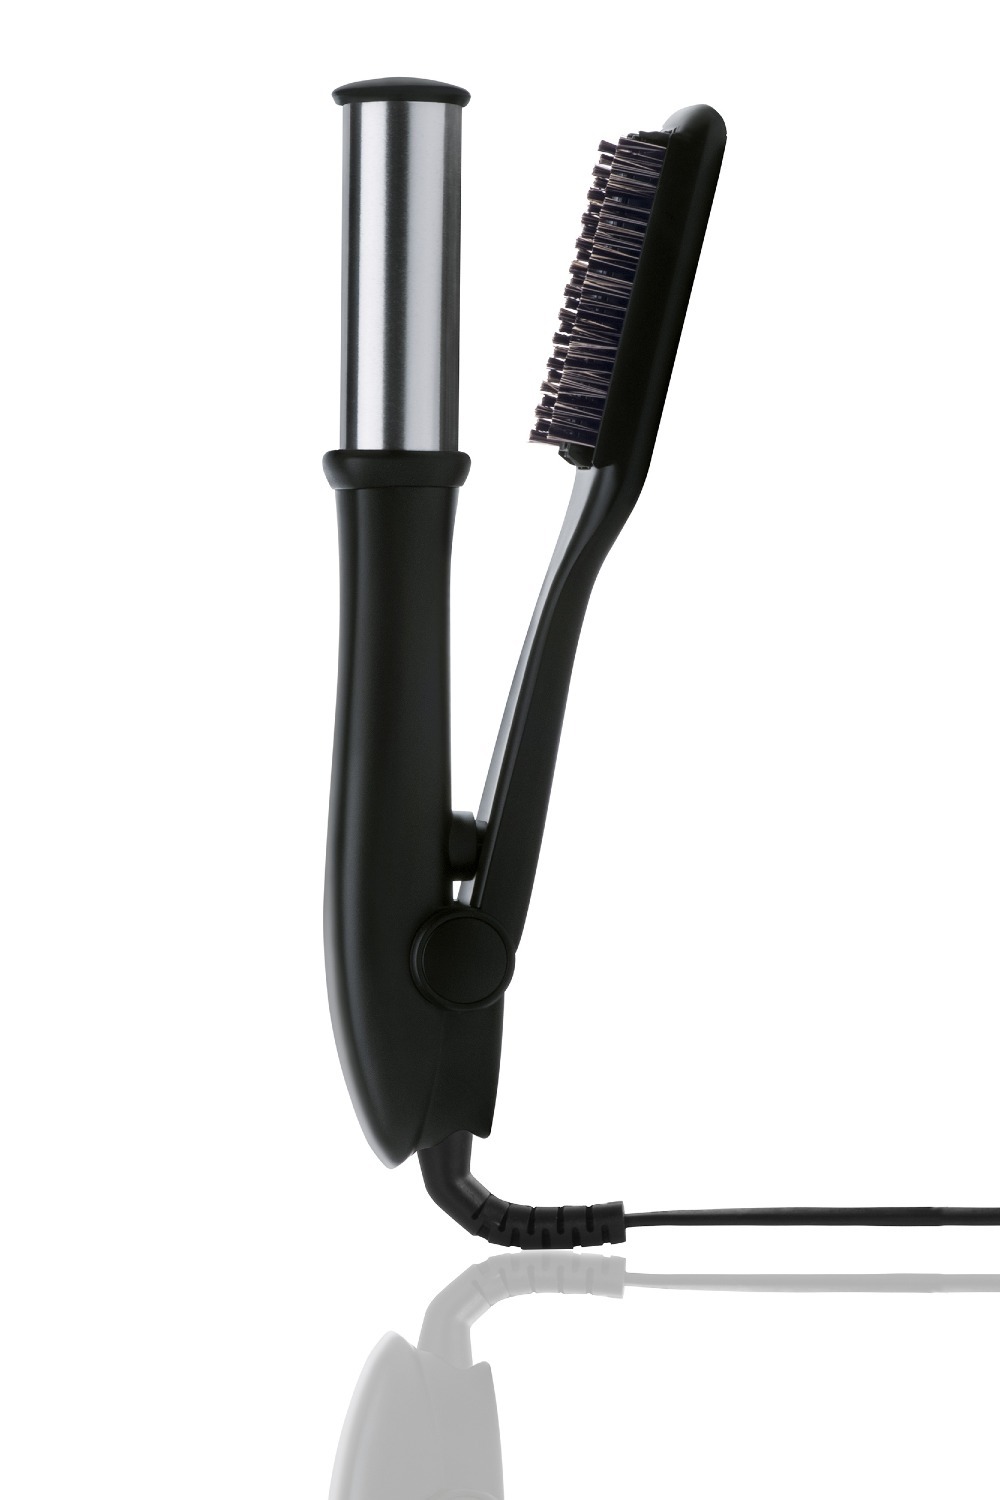 1.25" Instyler Max Prime Rotating Hair Iron $67.50 + Free Shipping